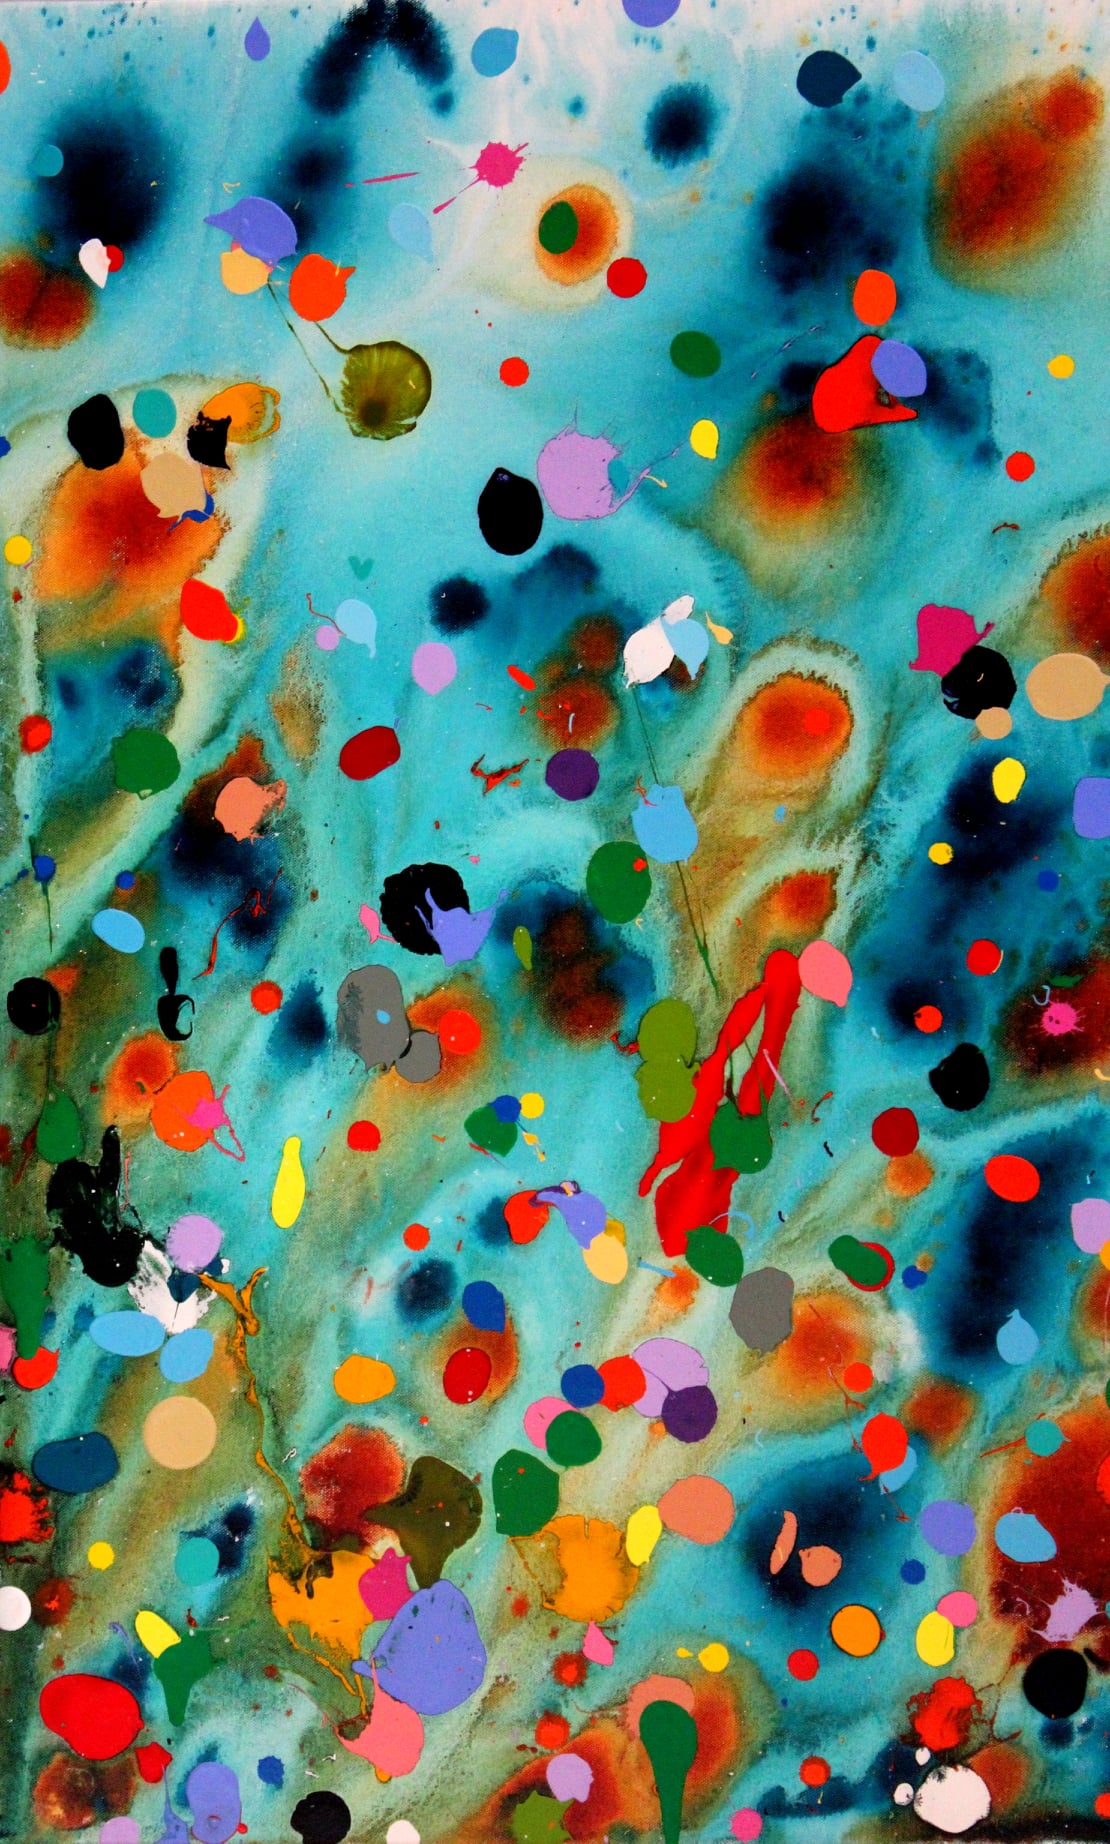 Abstract painting with a mostly turquoise background and layers of colourful paint splatters on top